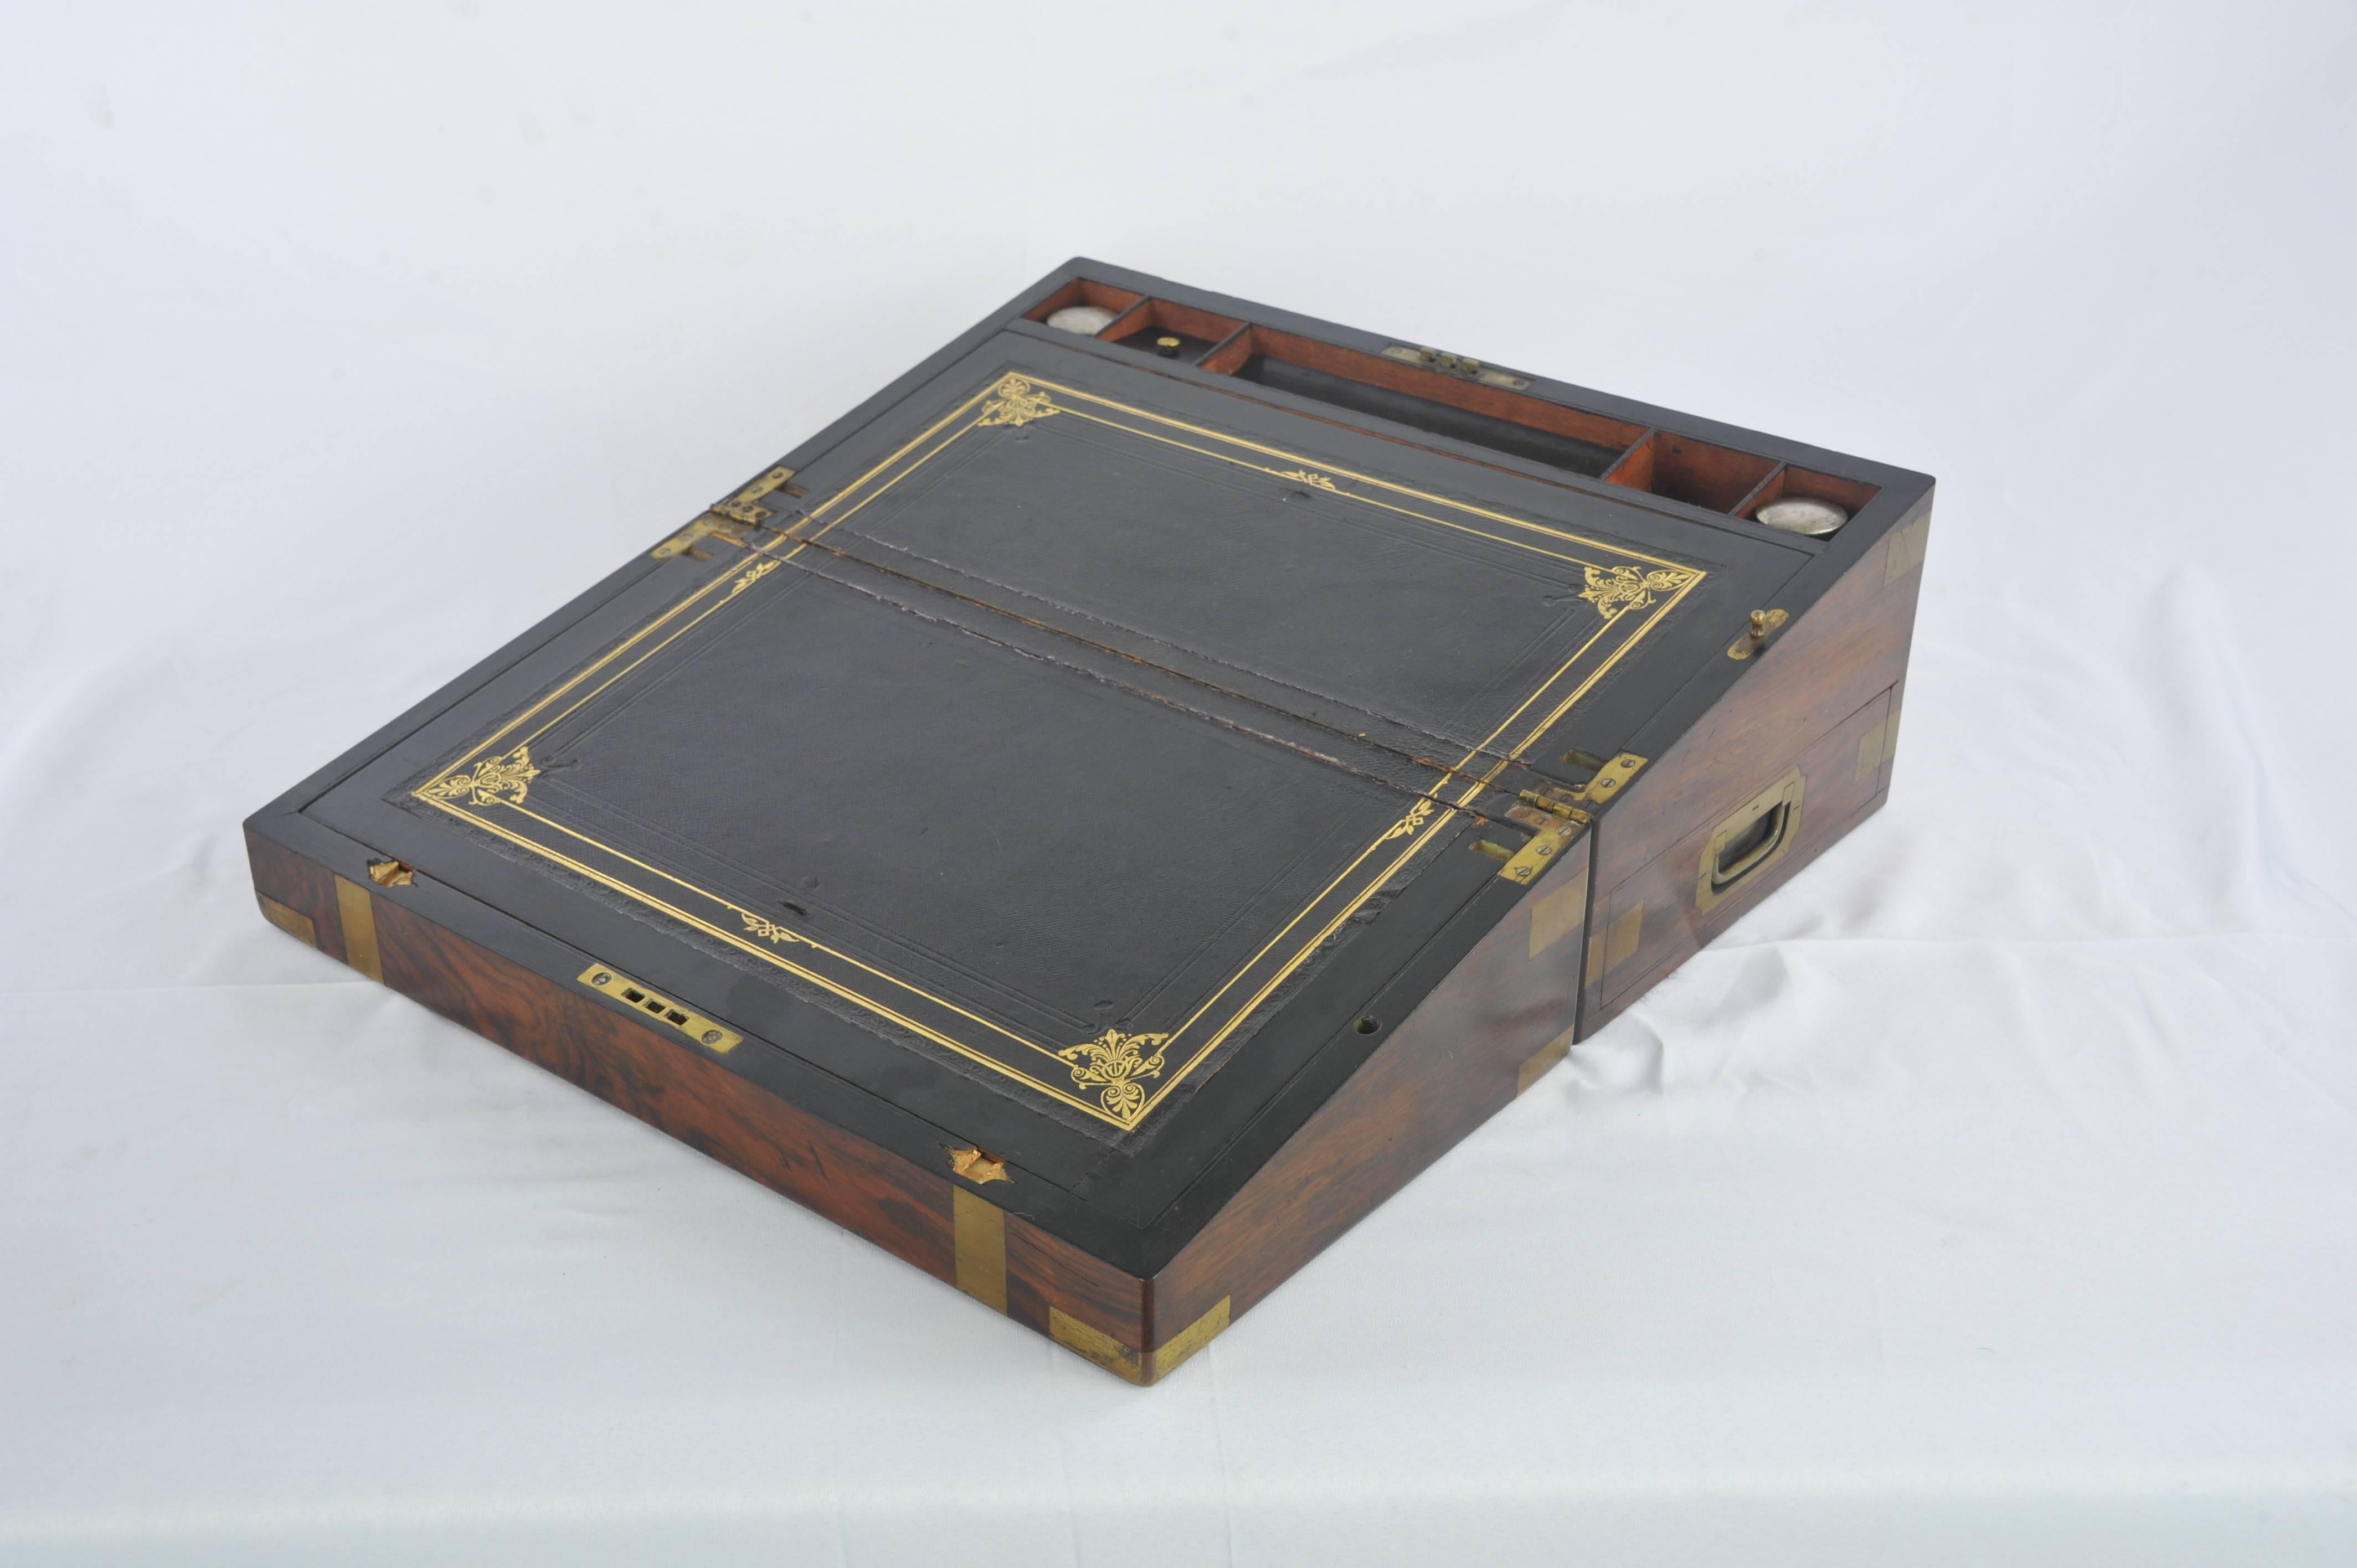 Writing slope, antique Victorian lap desk, marine walnut brass, Scotland, 1870, B1081.

Scotland 1870
Figured walnut
Original brass straps and corner pieces
Opens to reveal a black embossed leather top
Double hinged slope
Pentray centre